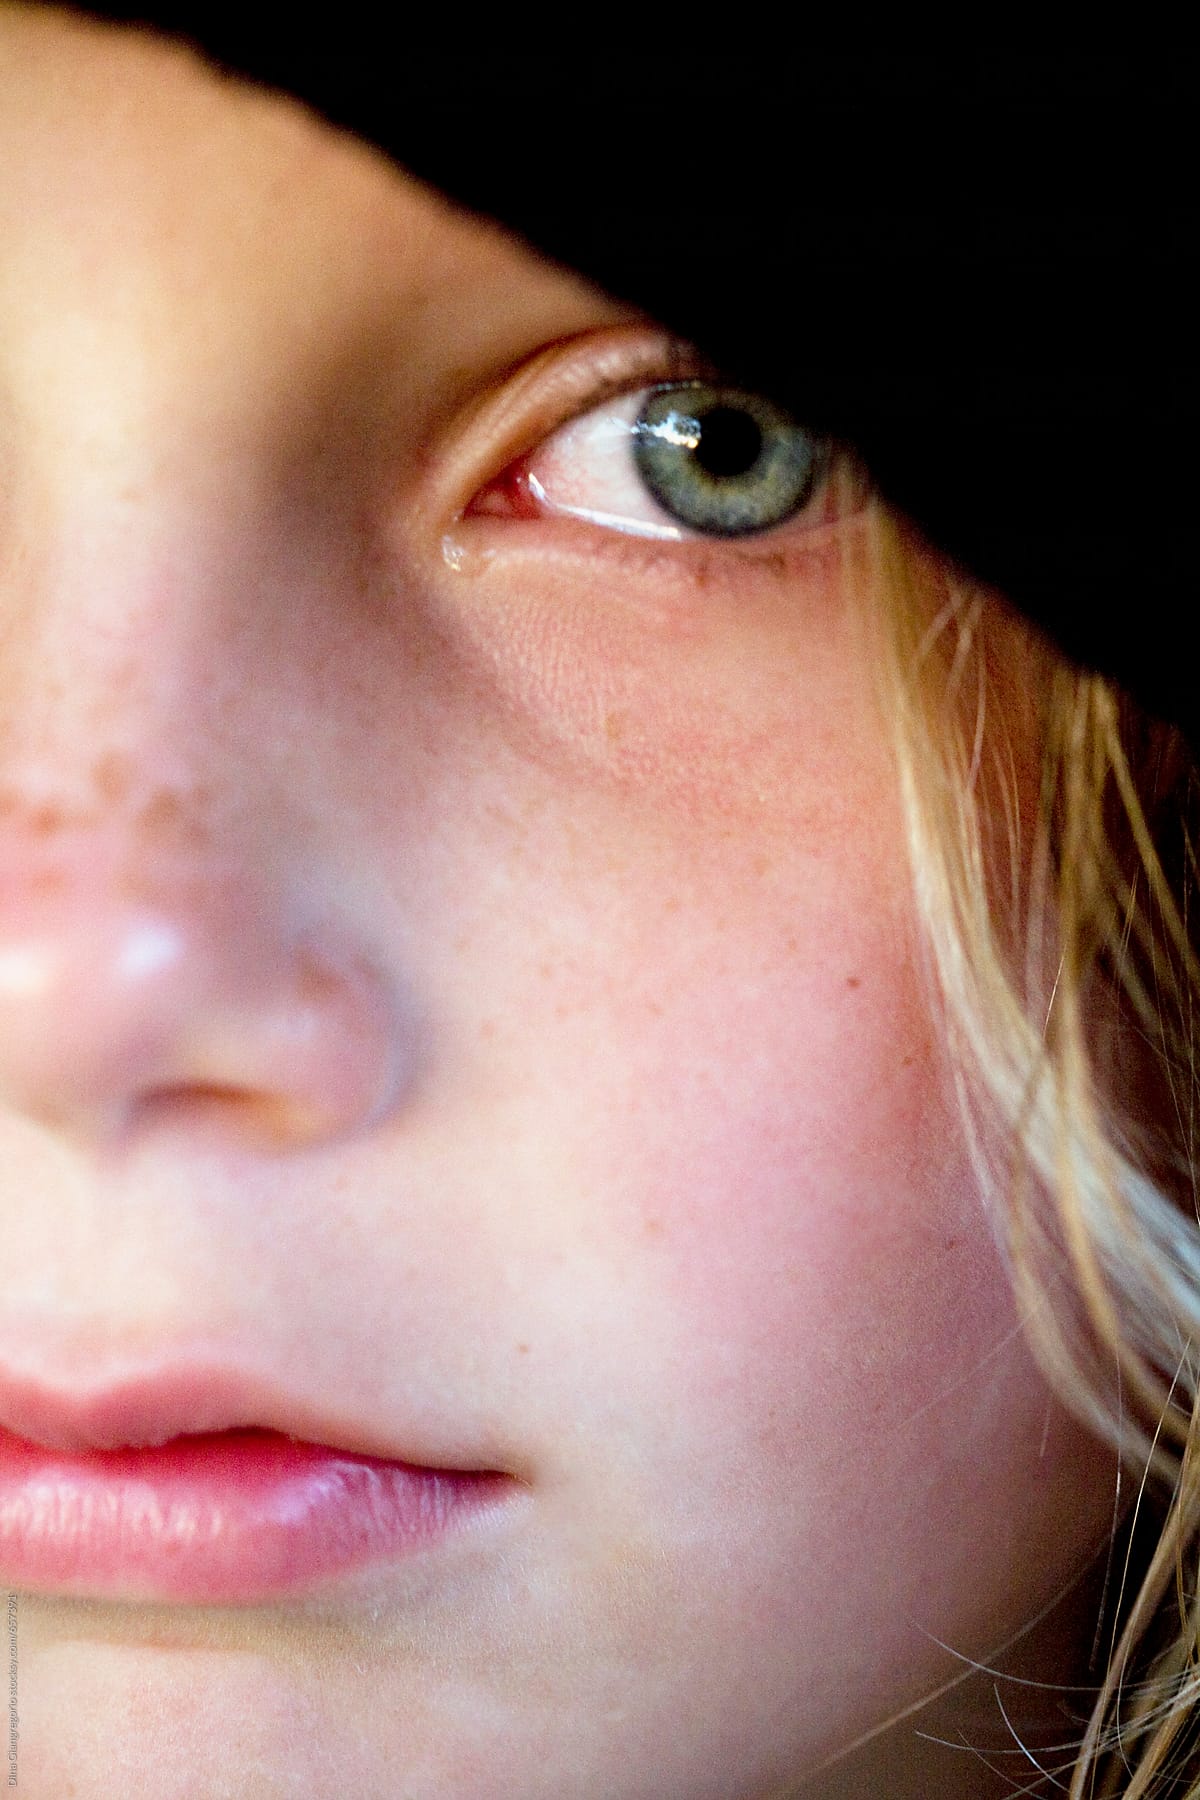 Girl With Teary Eyes By Dina Marie Giangregorio